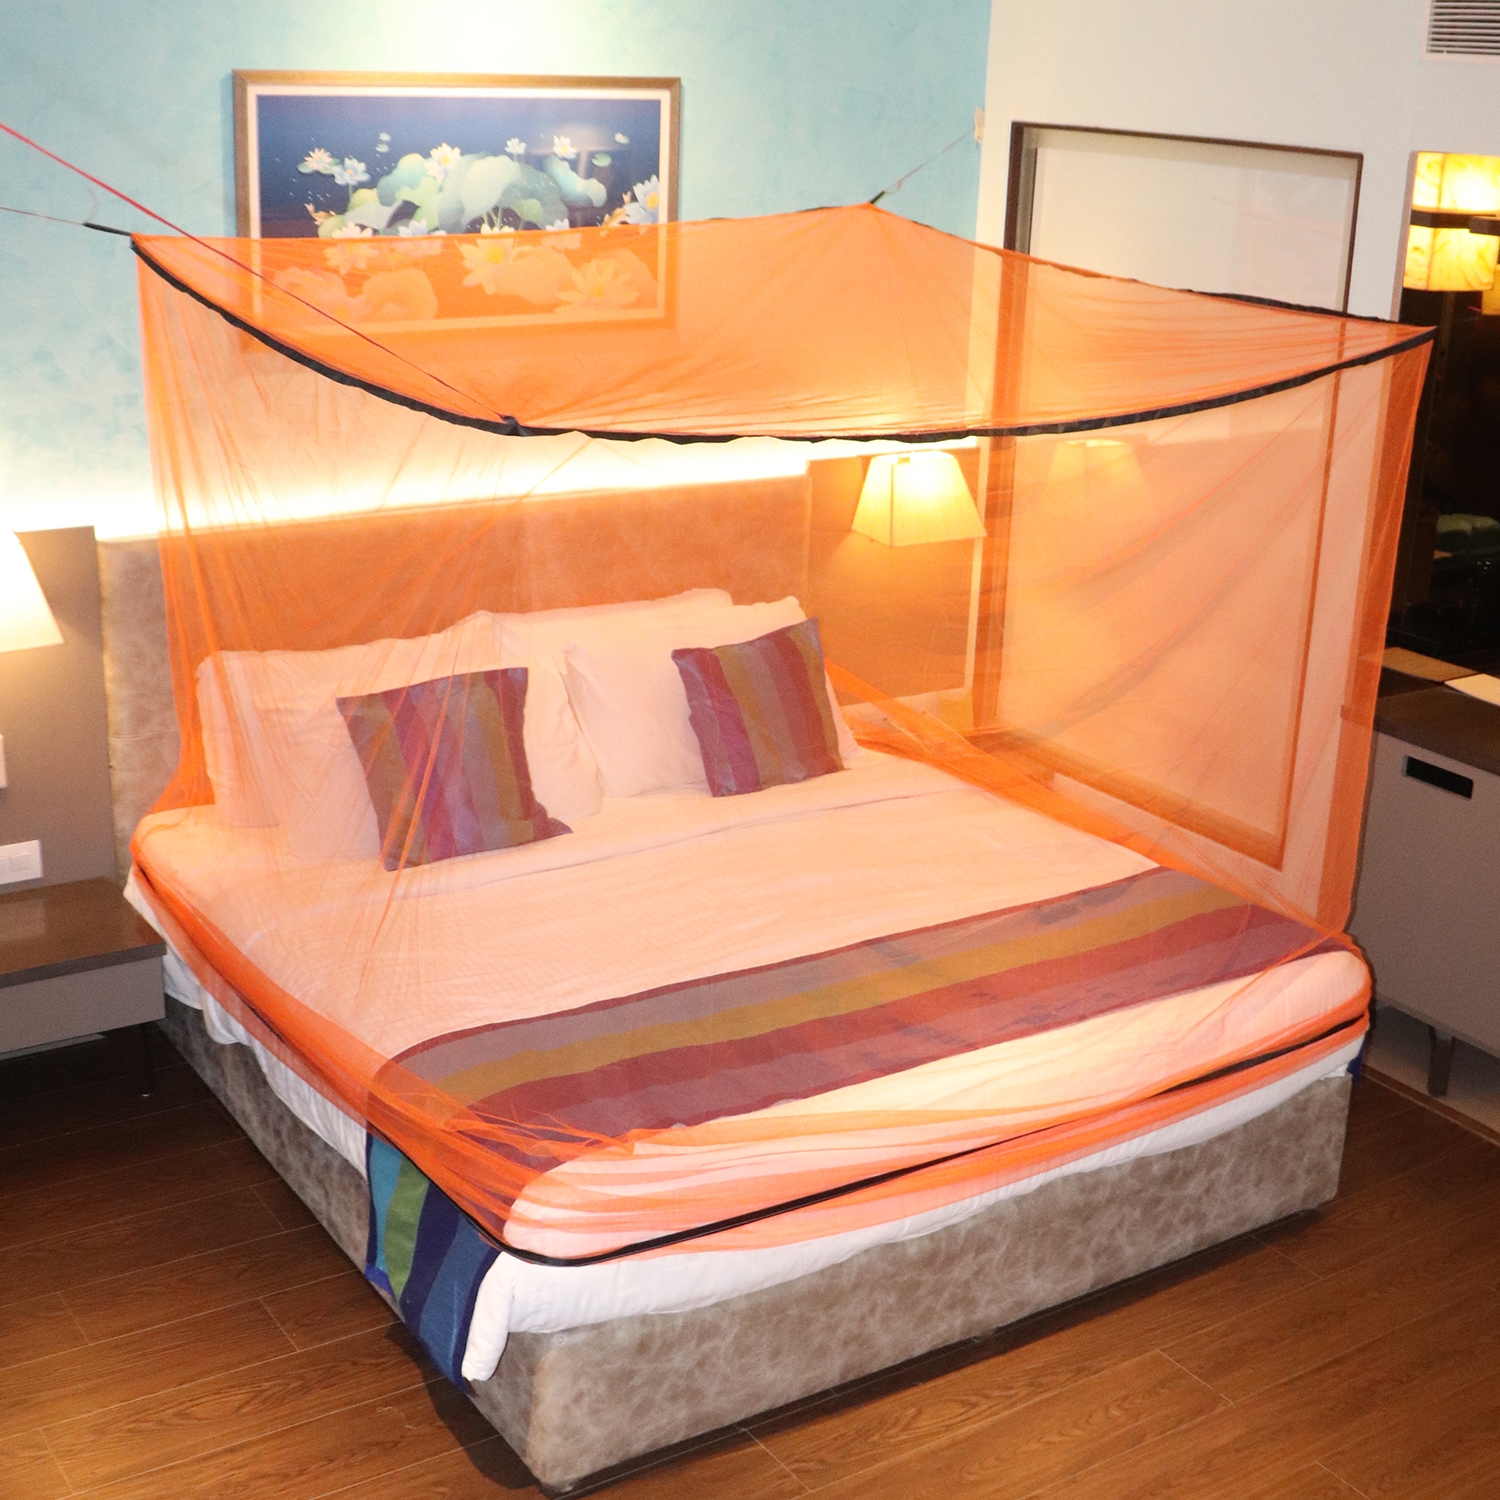 Mosquito Net for Double Bed, King-Size, Square Hanging Foldable Polyester Net Orange And Black 